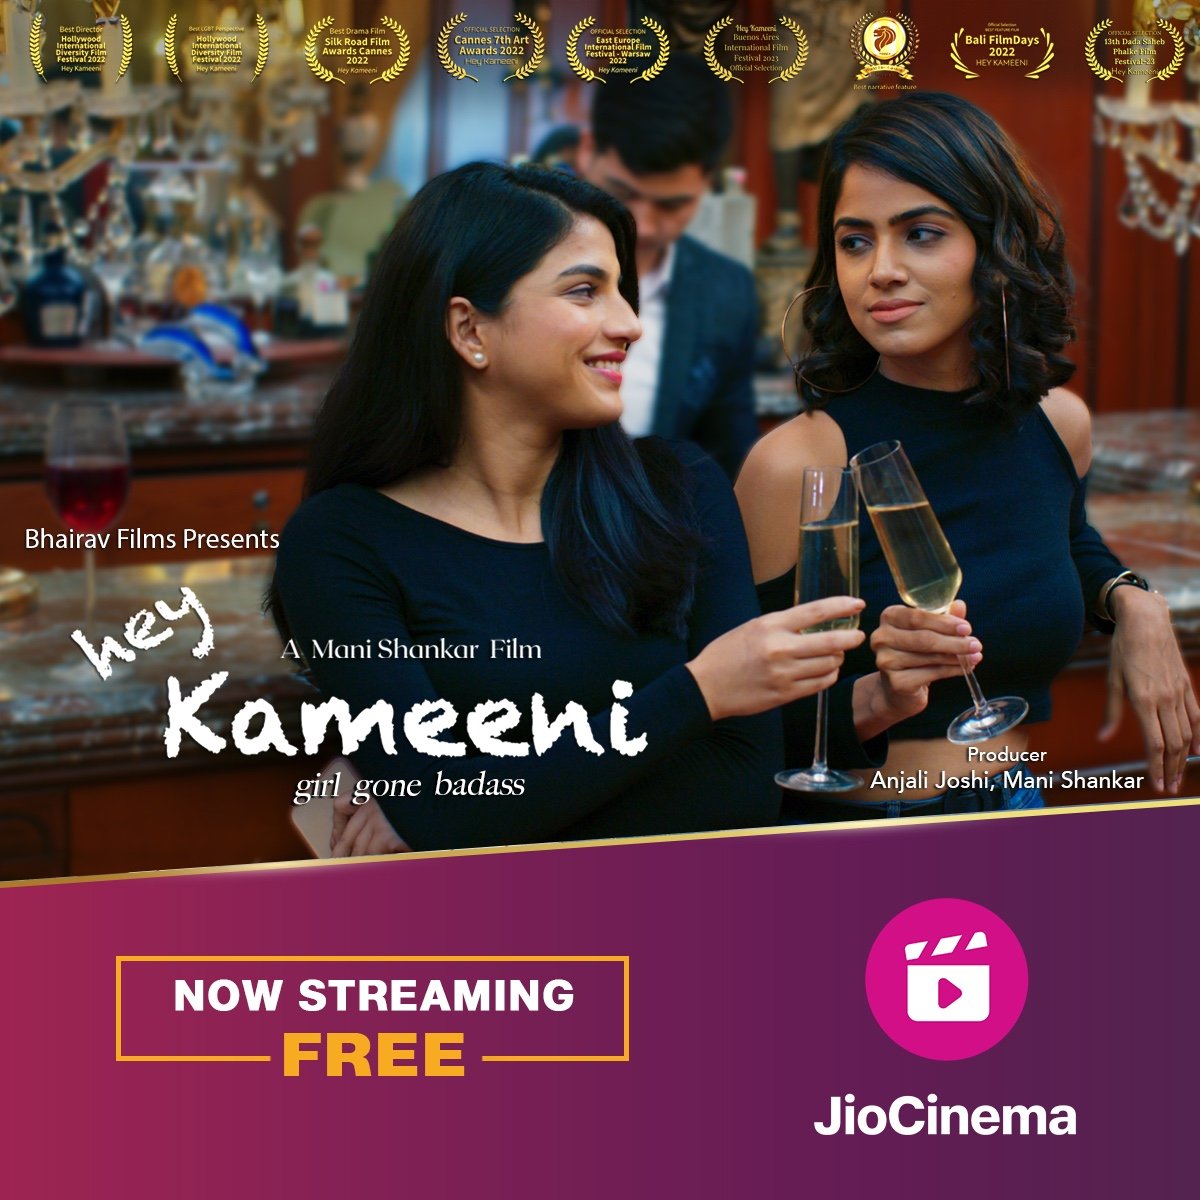 #HeyKameeni on Jio Cinema is one of the well made suspense thrillers this year. The badass lead character is a game-changer, that will make every girl want to be like her. The film kept me hooked from start to finish. Go for it if you are craving a dose of girl power! 3…